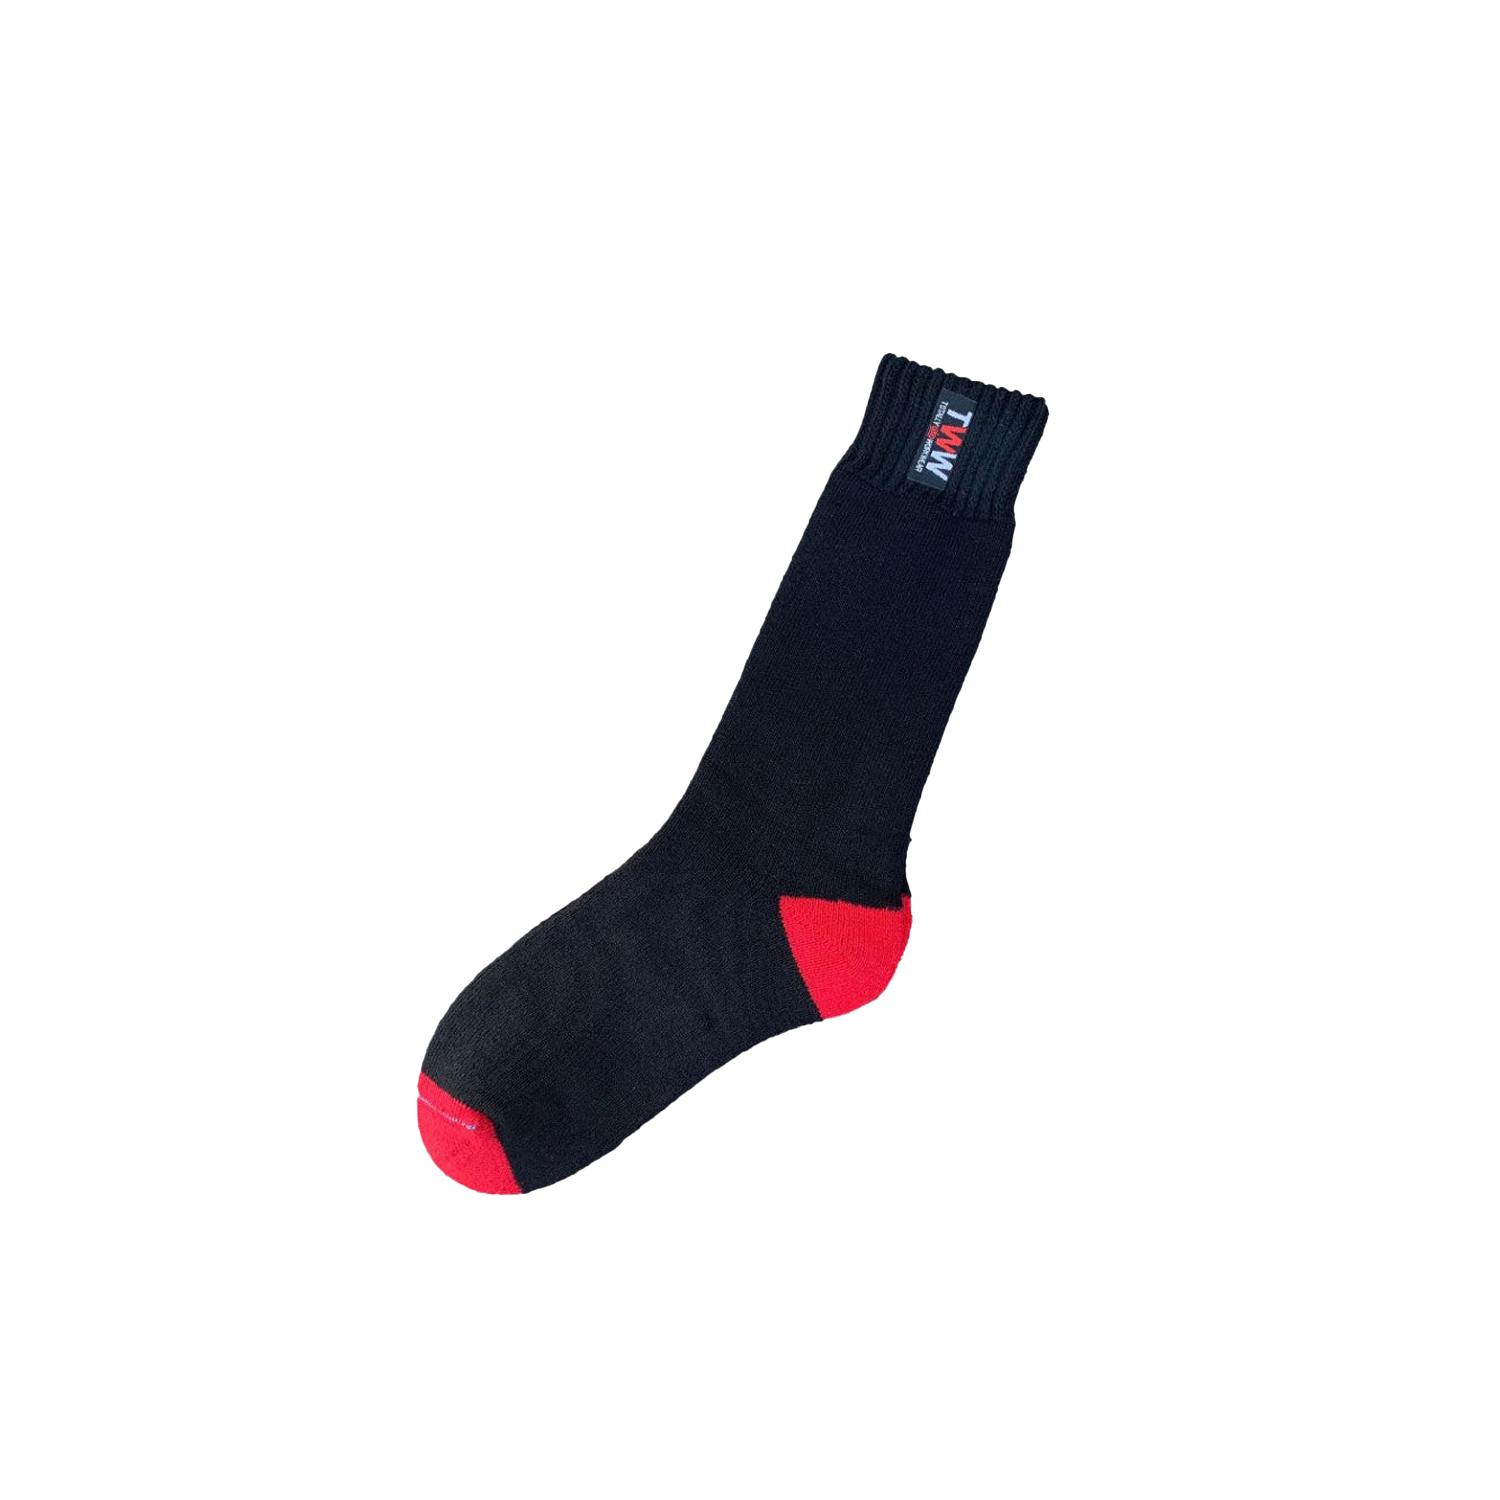 Bamboo Textiles Men's TWW Extra Thick Sock - Red/Black - Totally Workwear